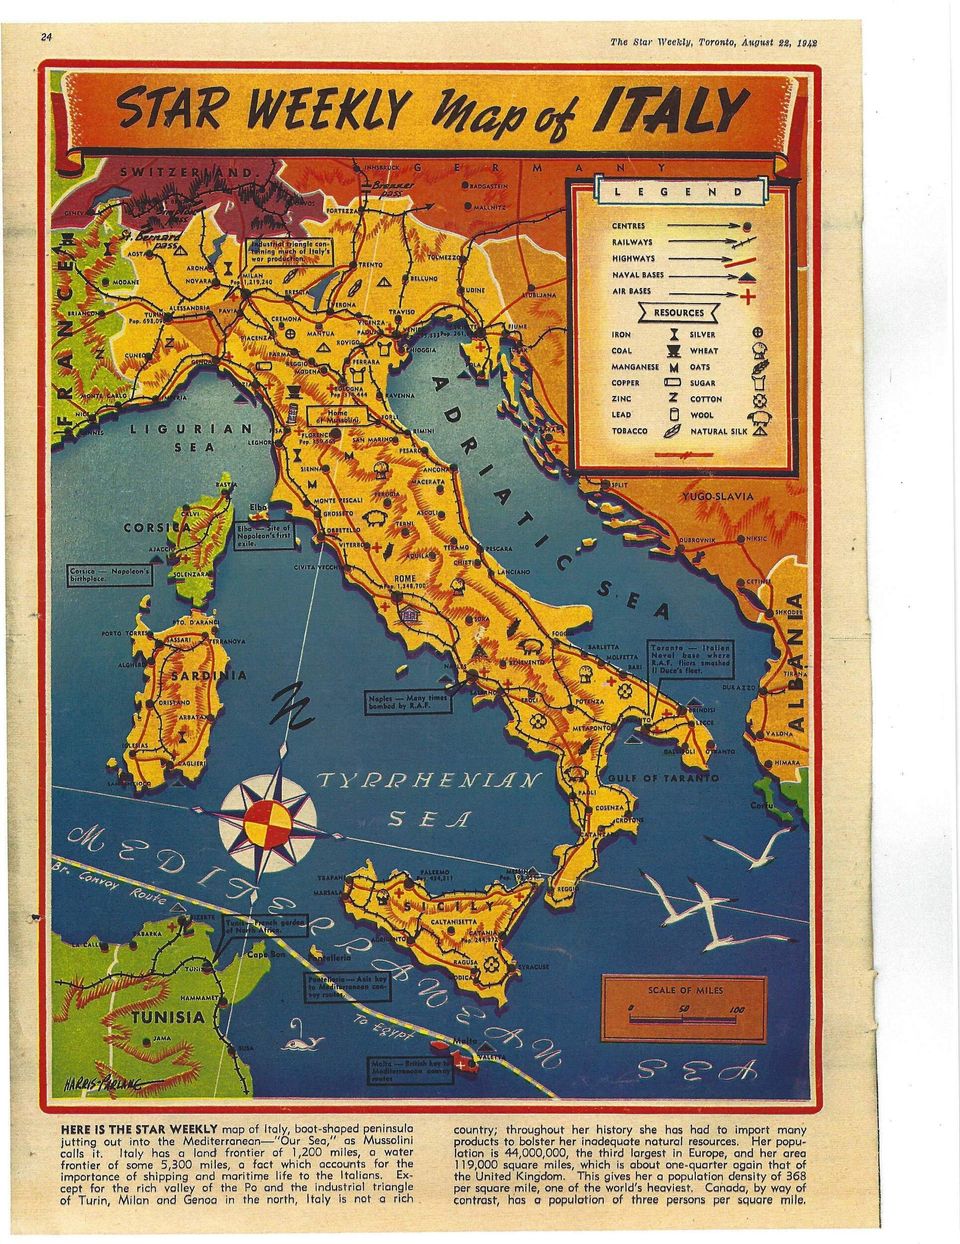 Star Weekly Italy Map Found On Page 24